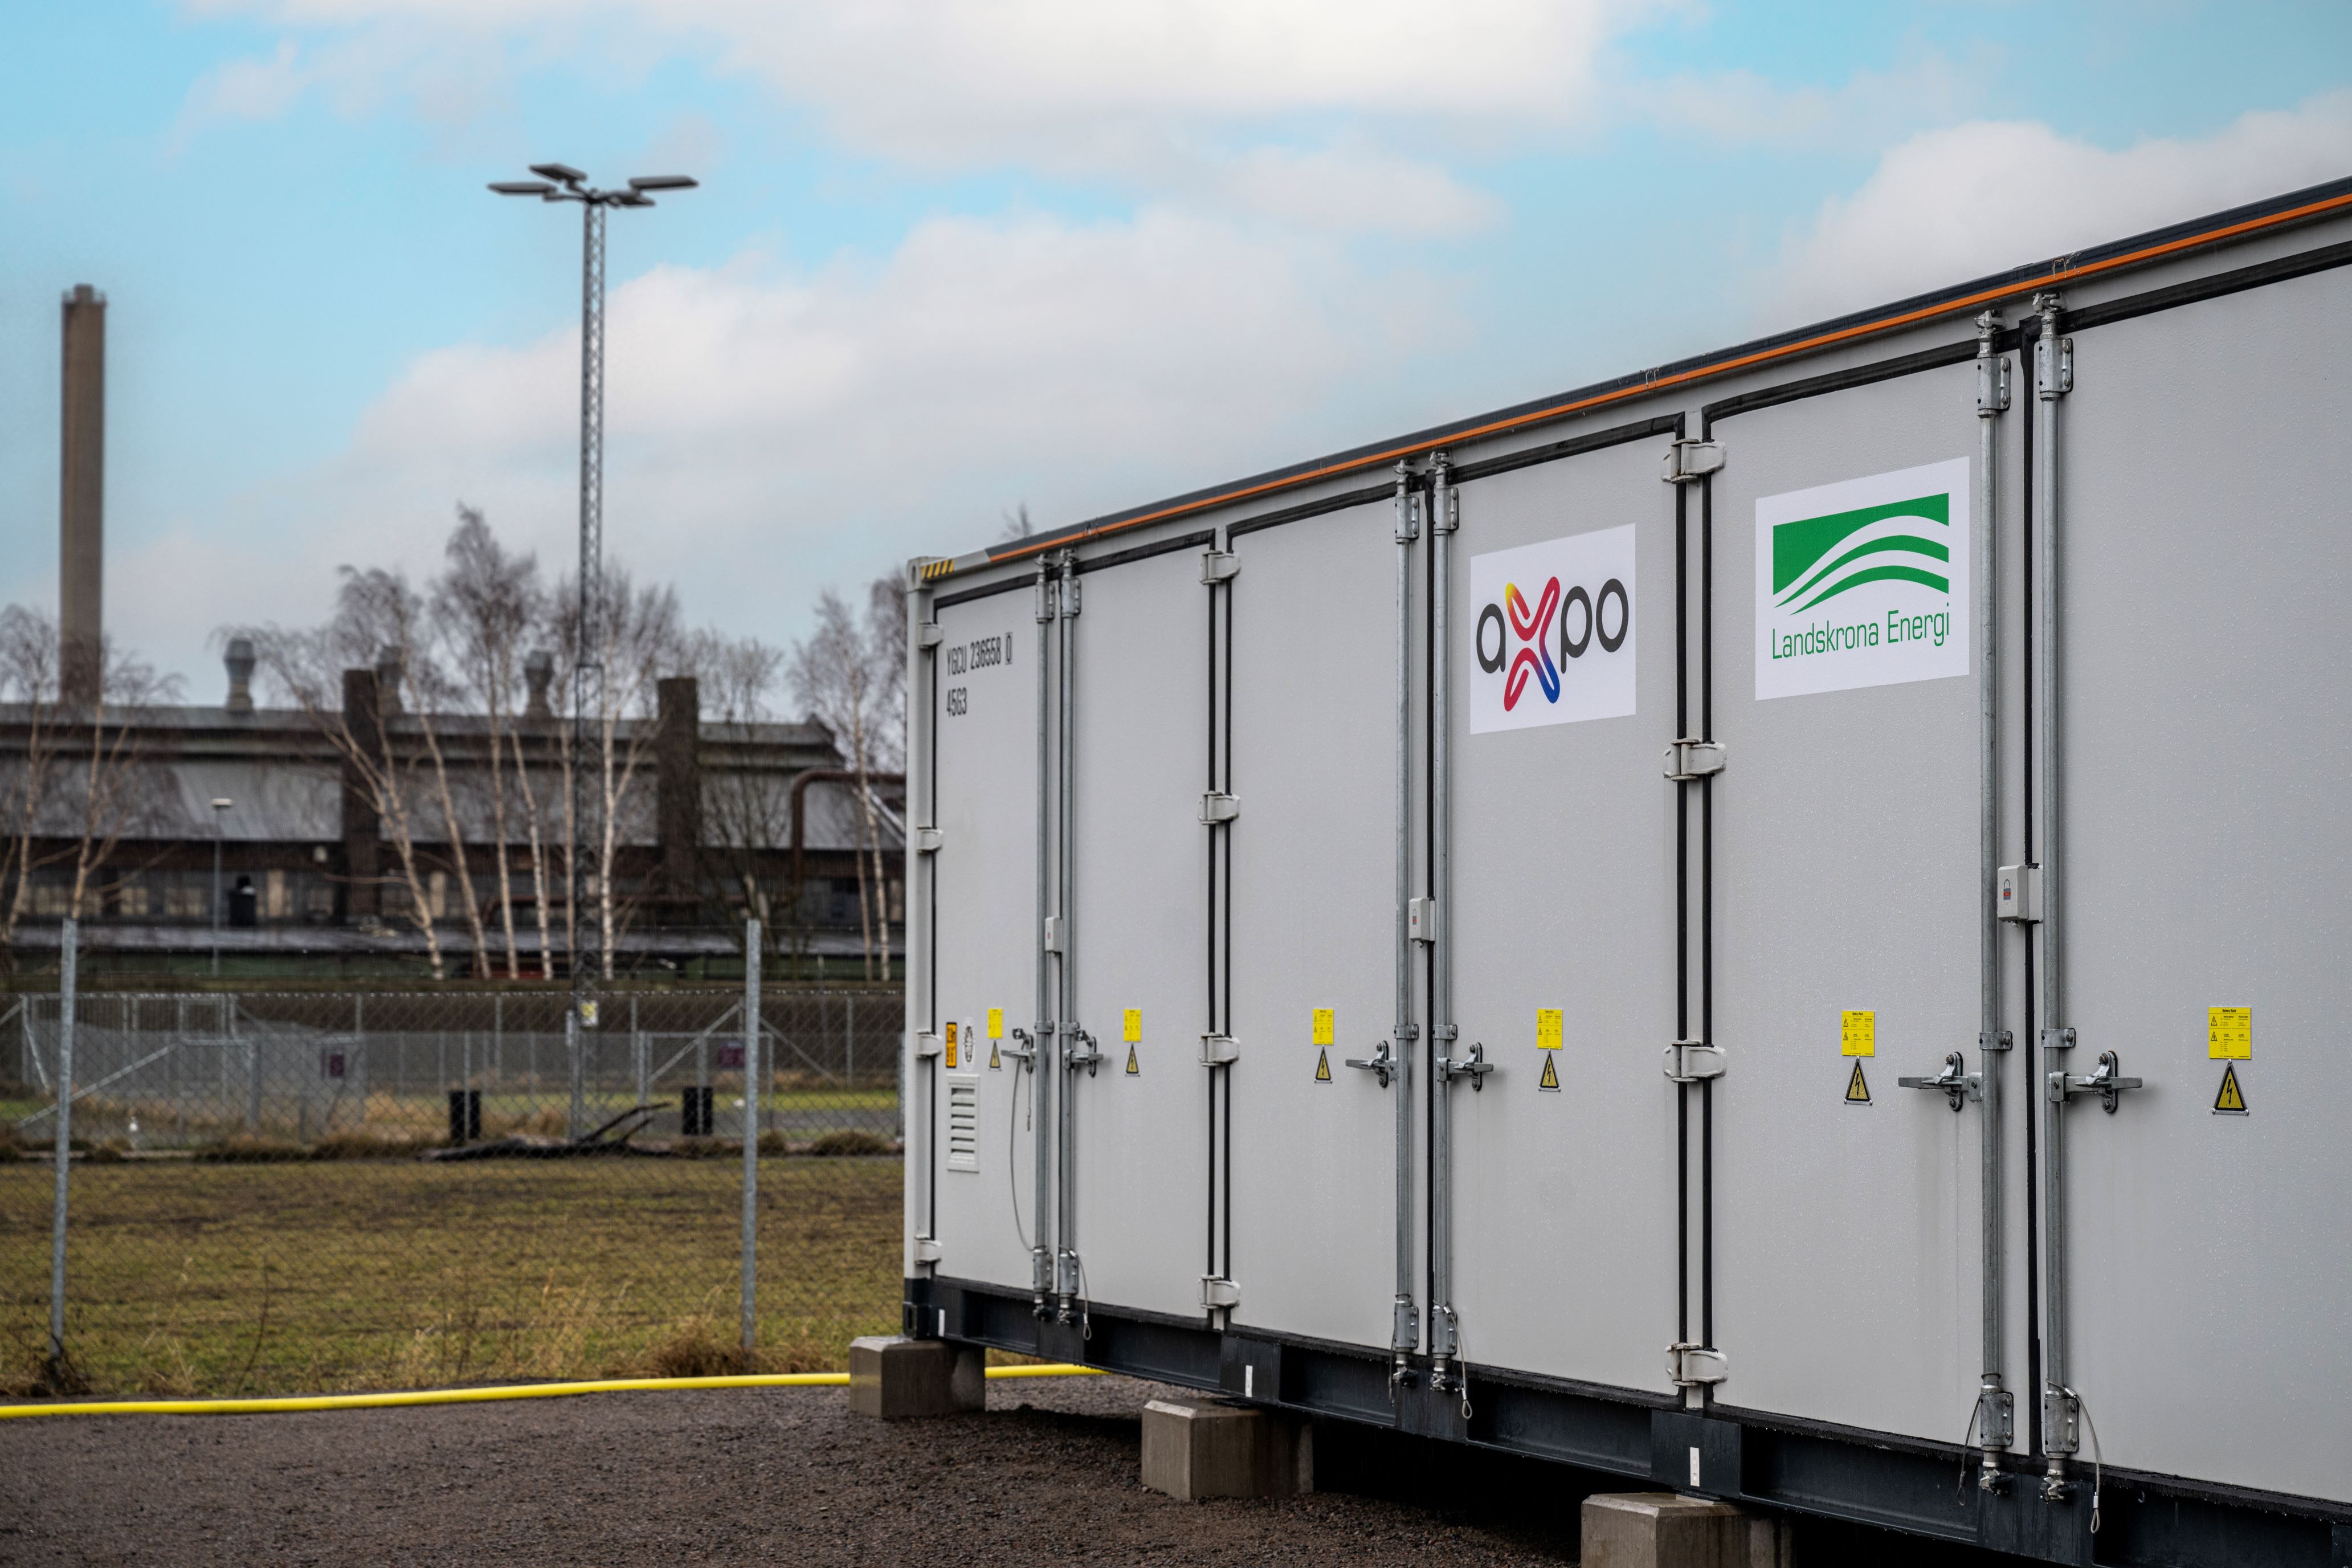 The importance of large storage capacities is crucial in the course of the energy transition. Axpo will continue to expand its storage activities over the next few years.